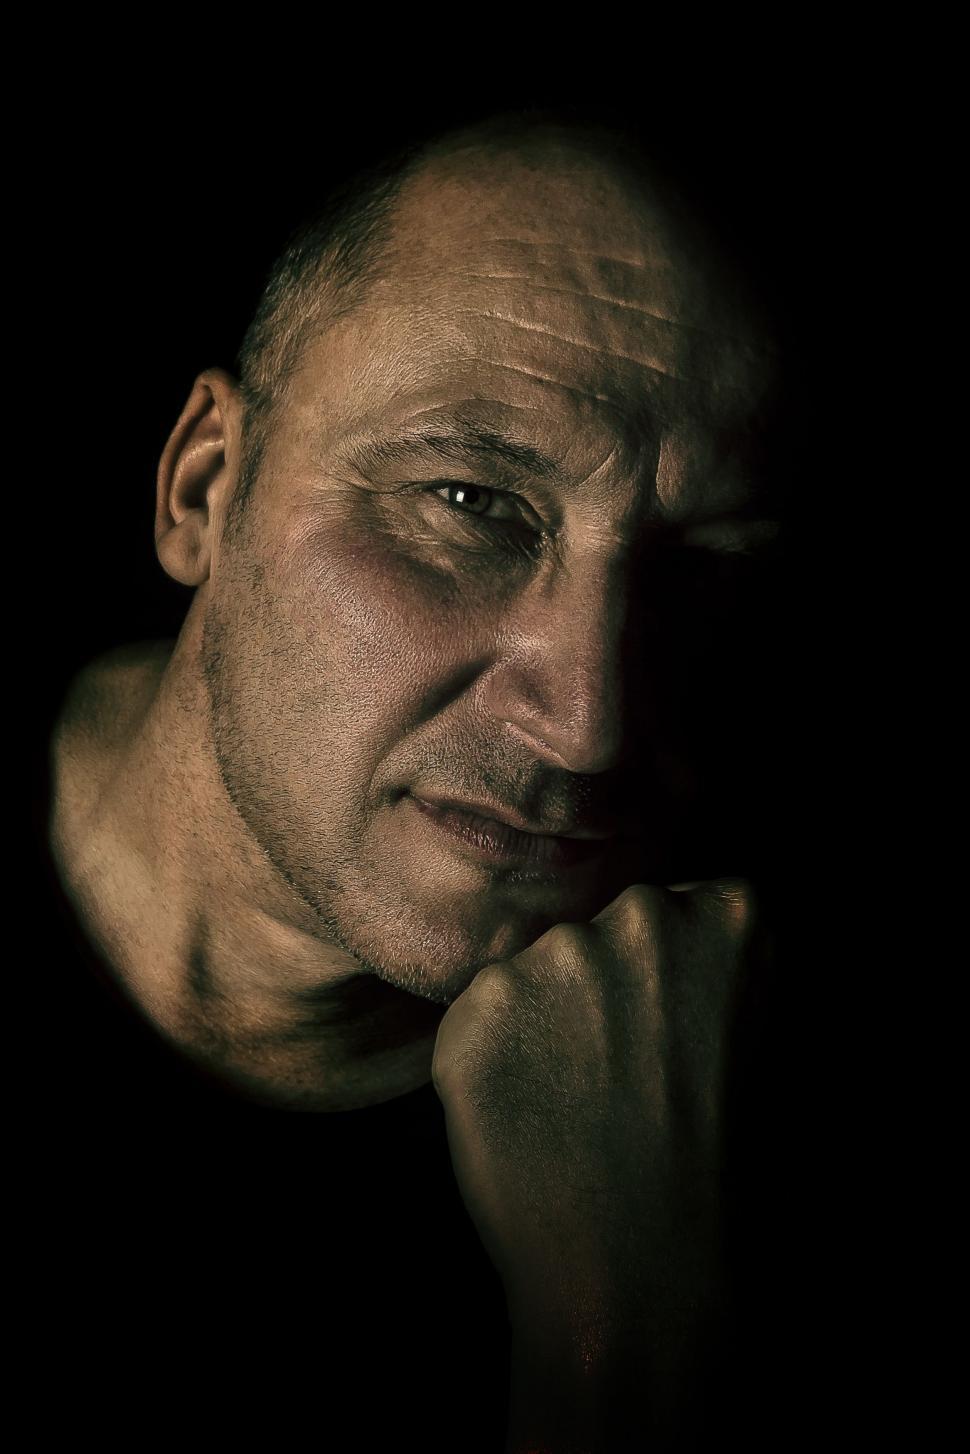 Free Image of Dark View of Middle Aged Man Face  